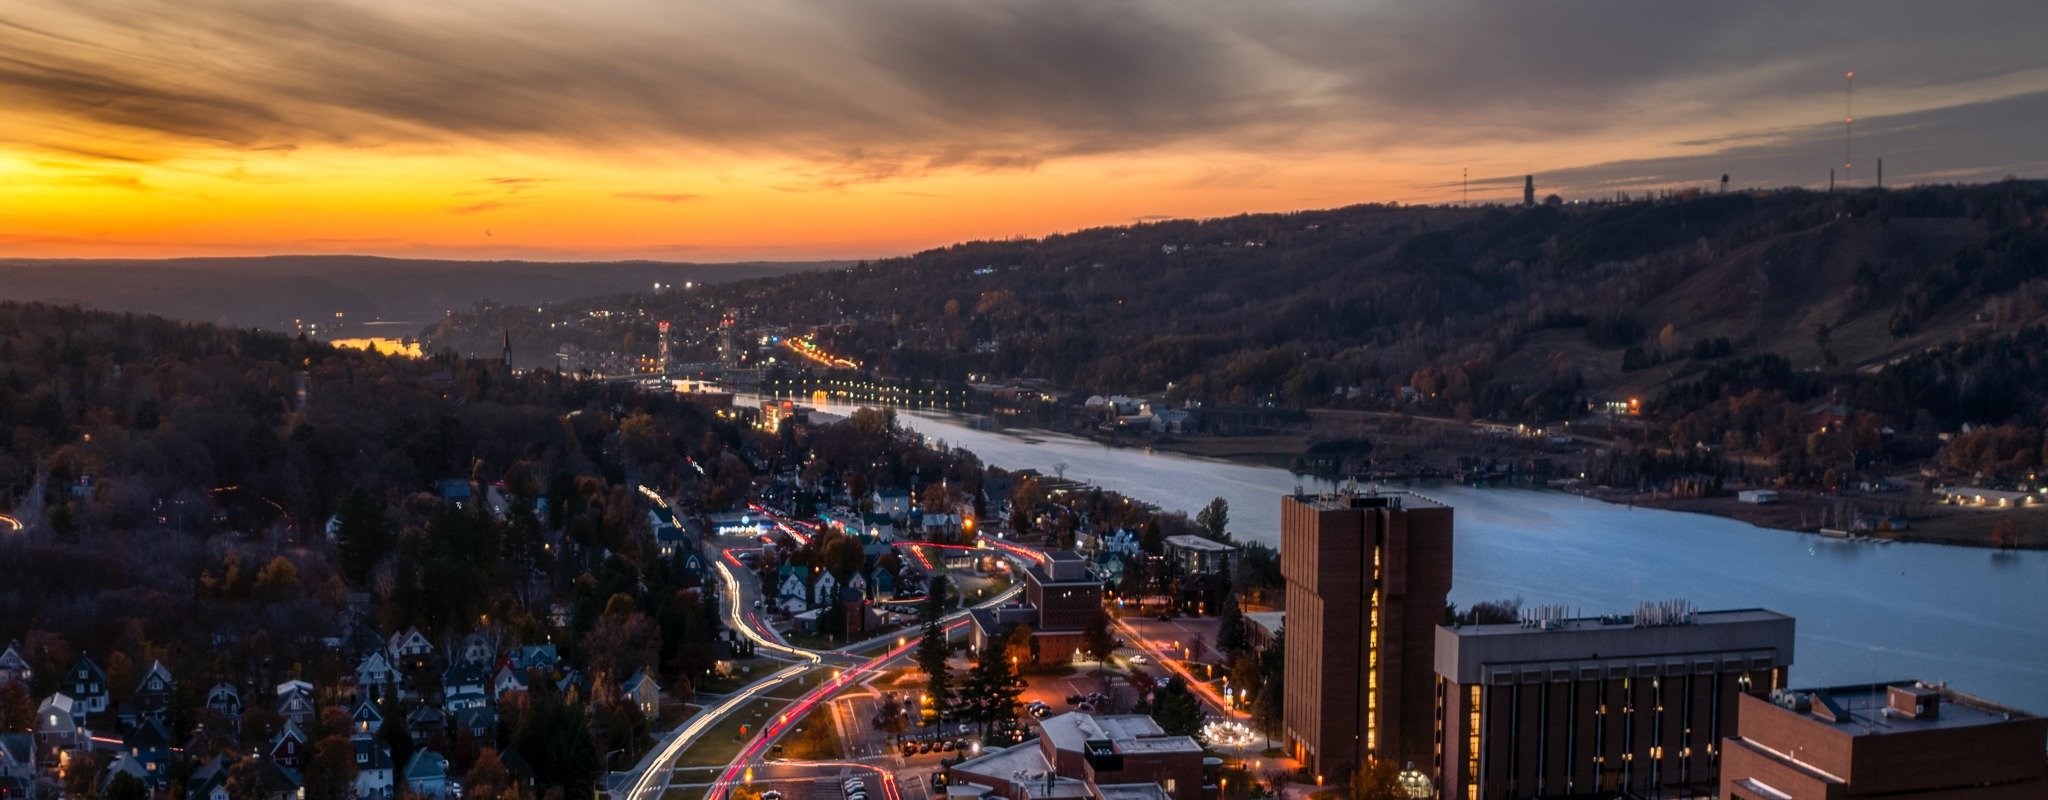 A summer sunset in Houghton, Michigan, with Michigan Tech's Campus lit by street lights and cars.